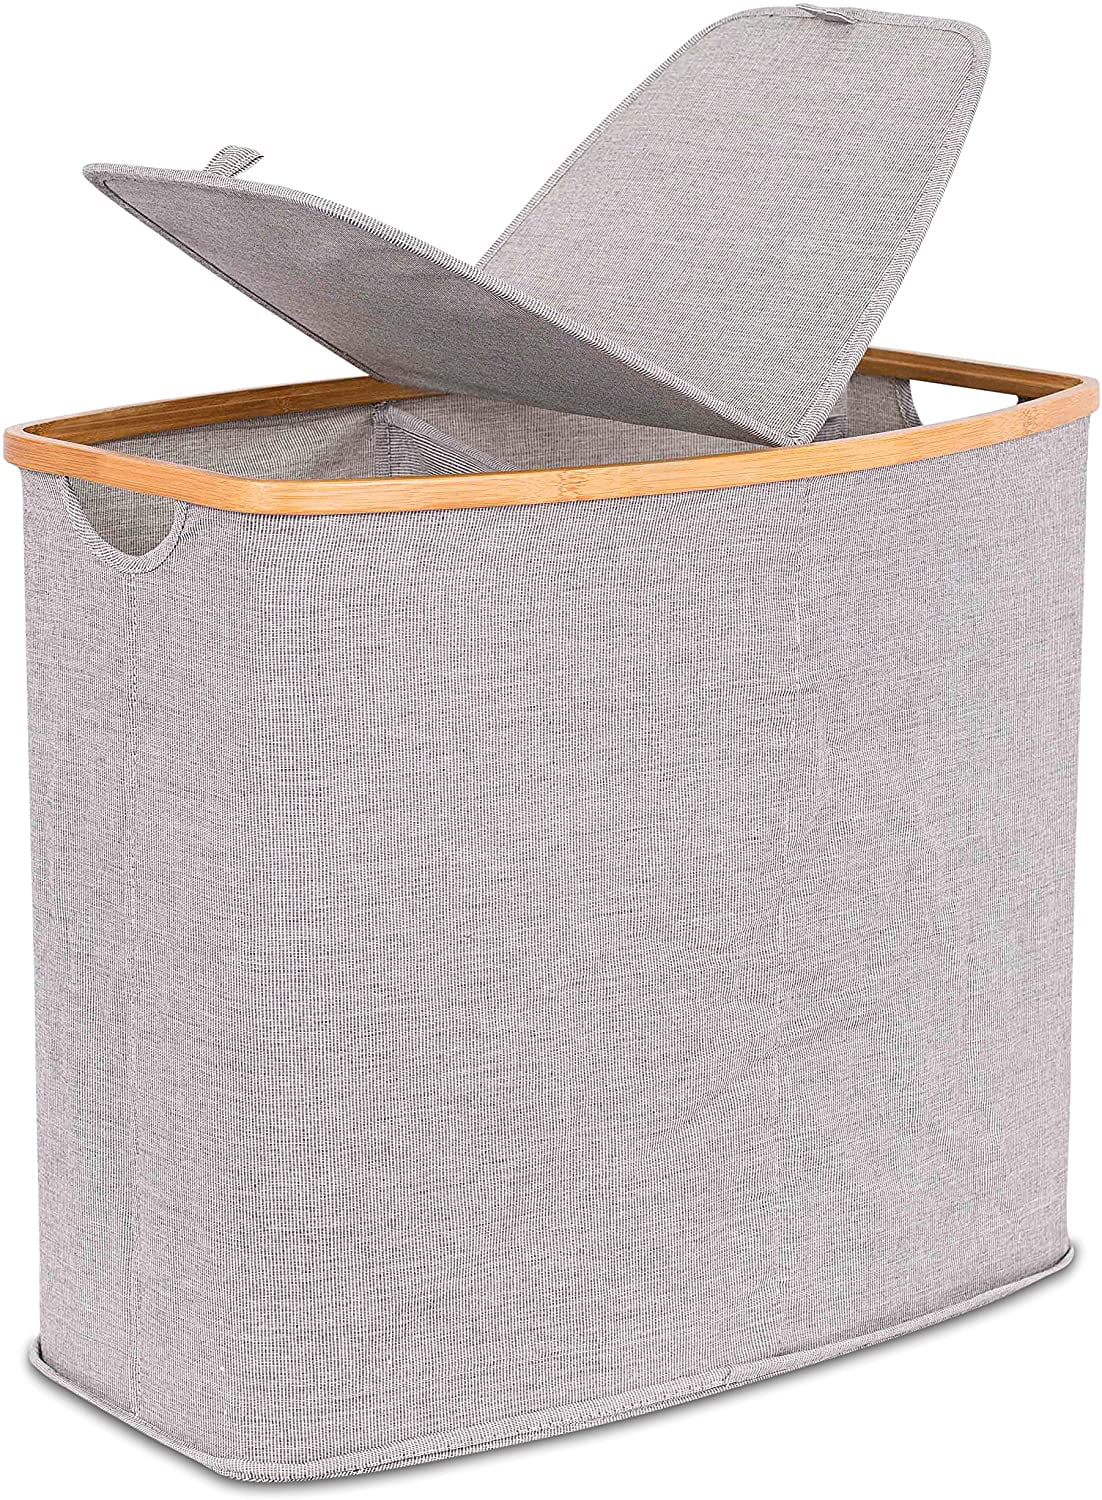 Grey Pop Up Laundry Basket Waterproof Collapsible Strong Durable Easy to Carry 